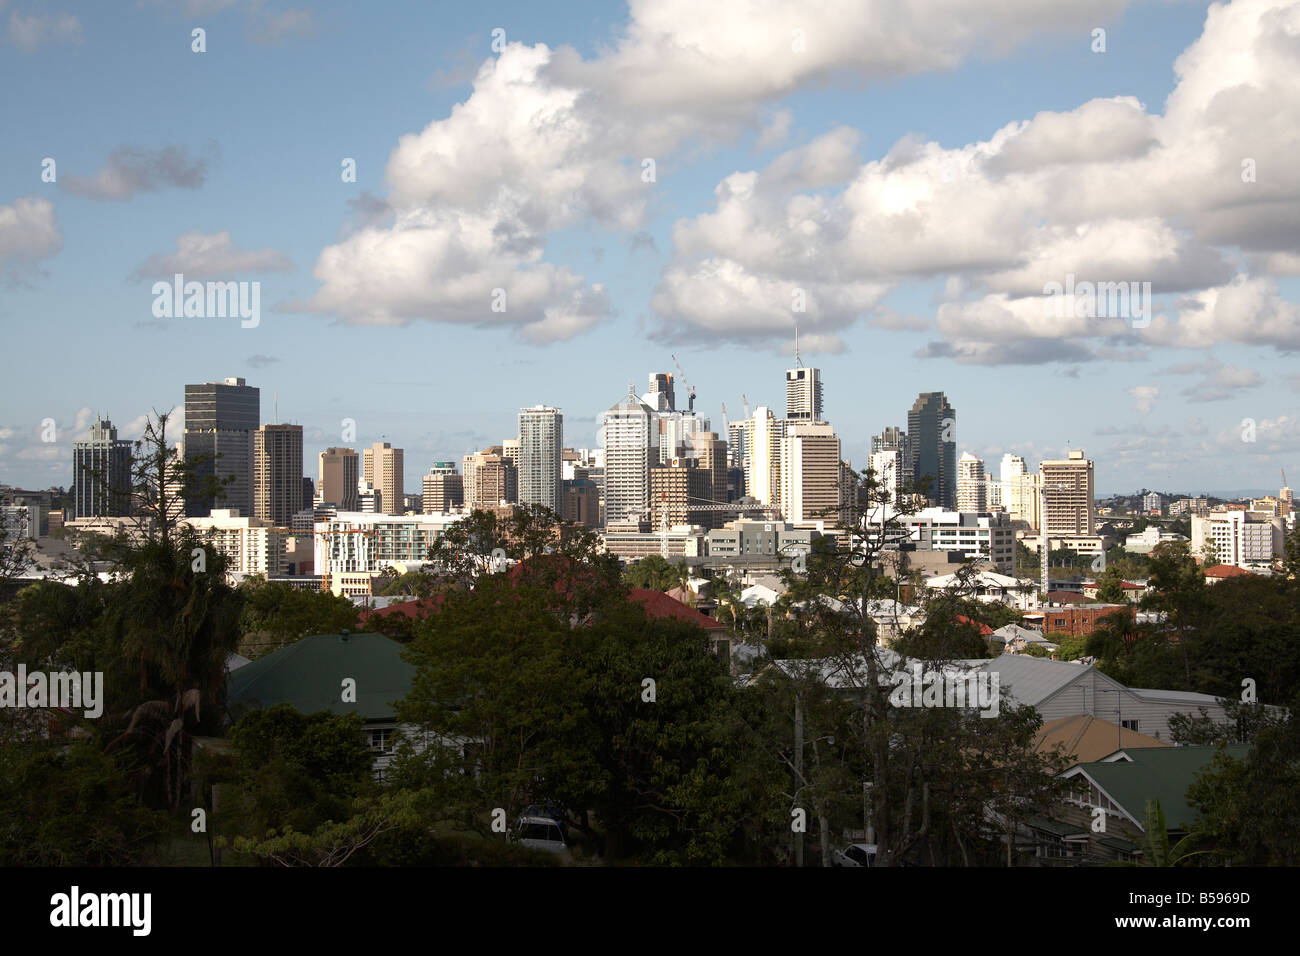 View of city centre business district buildings skyline beyond suburbs in Brisbane Queensland QLD Australia Stock Photo